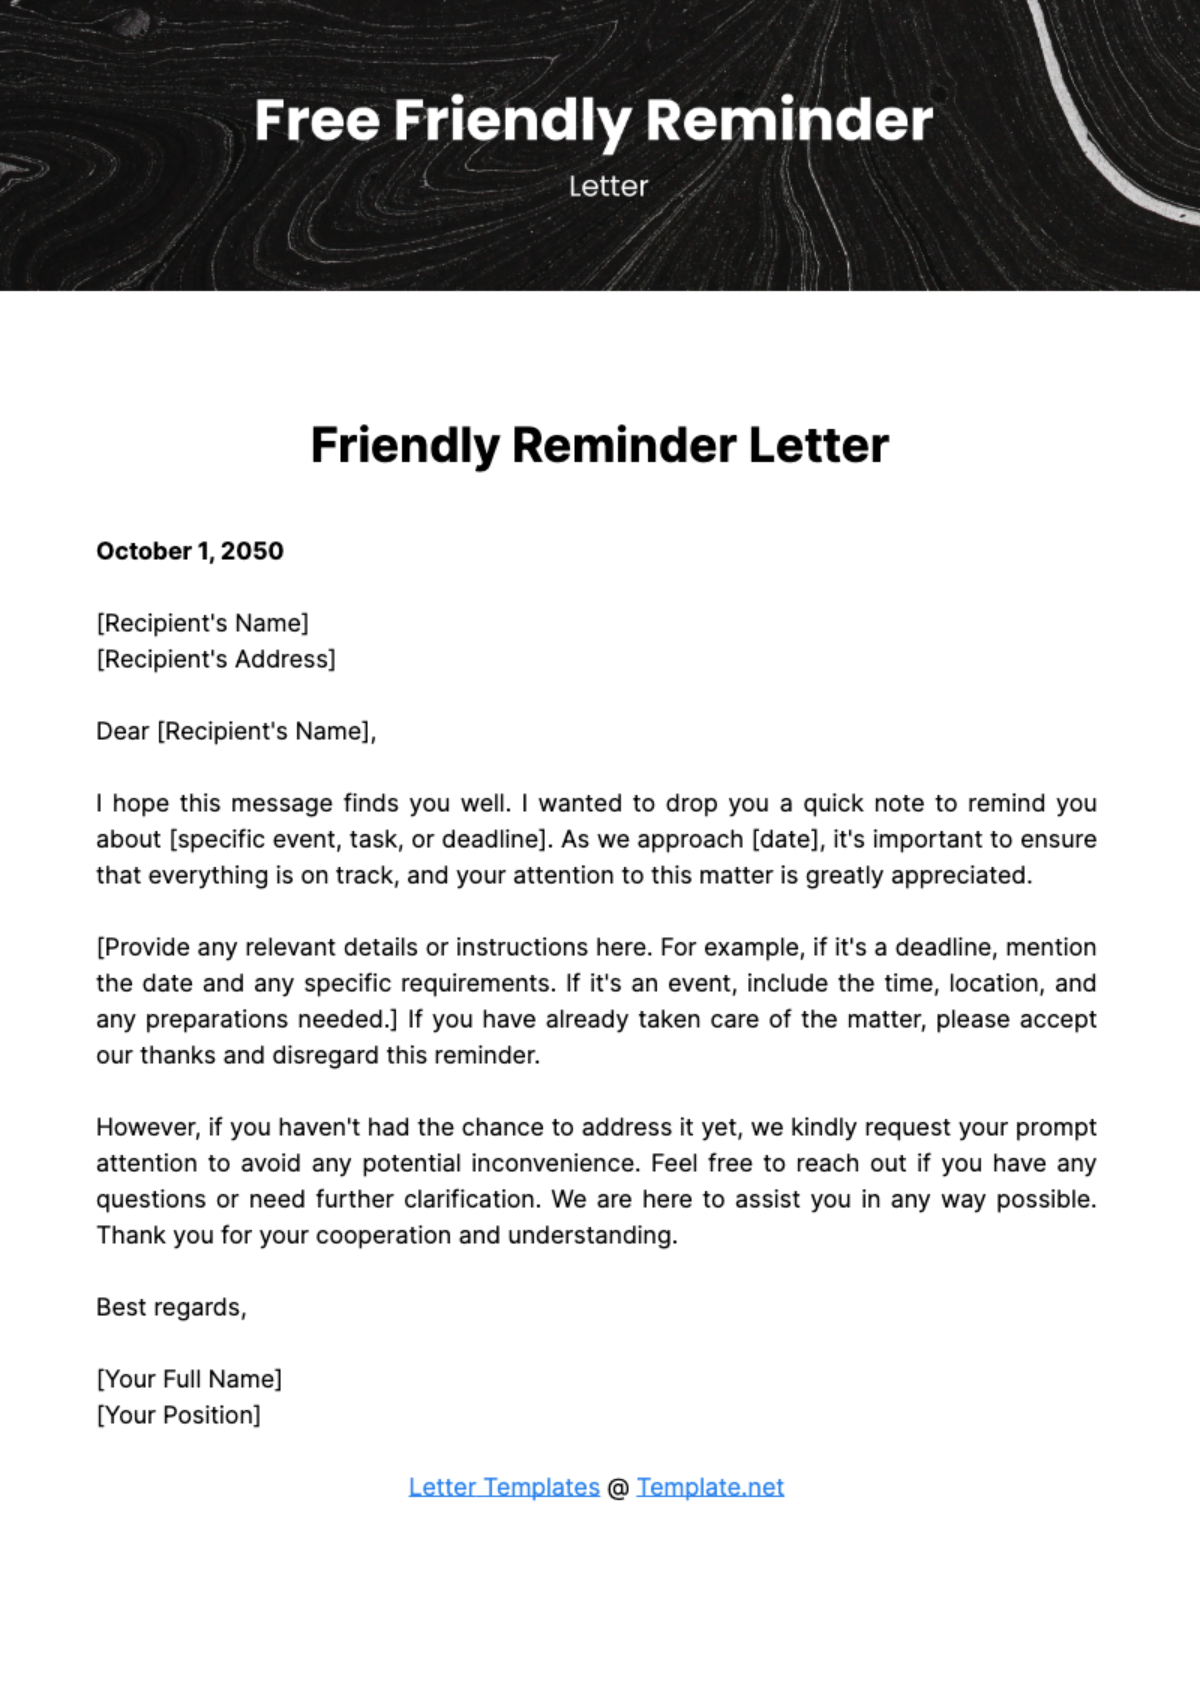 Friendly Reminder Letter Template